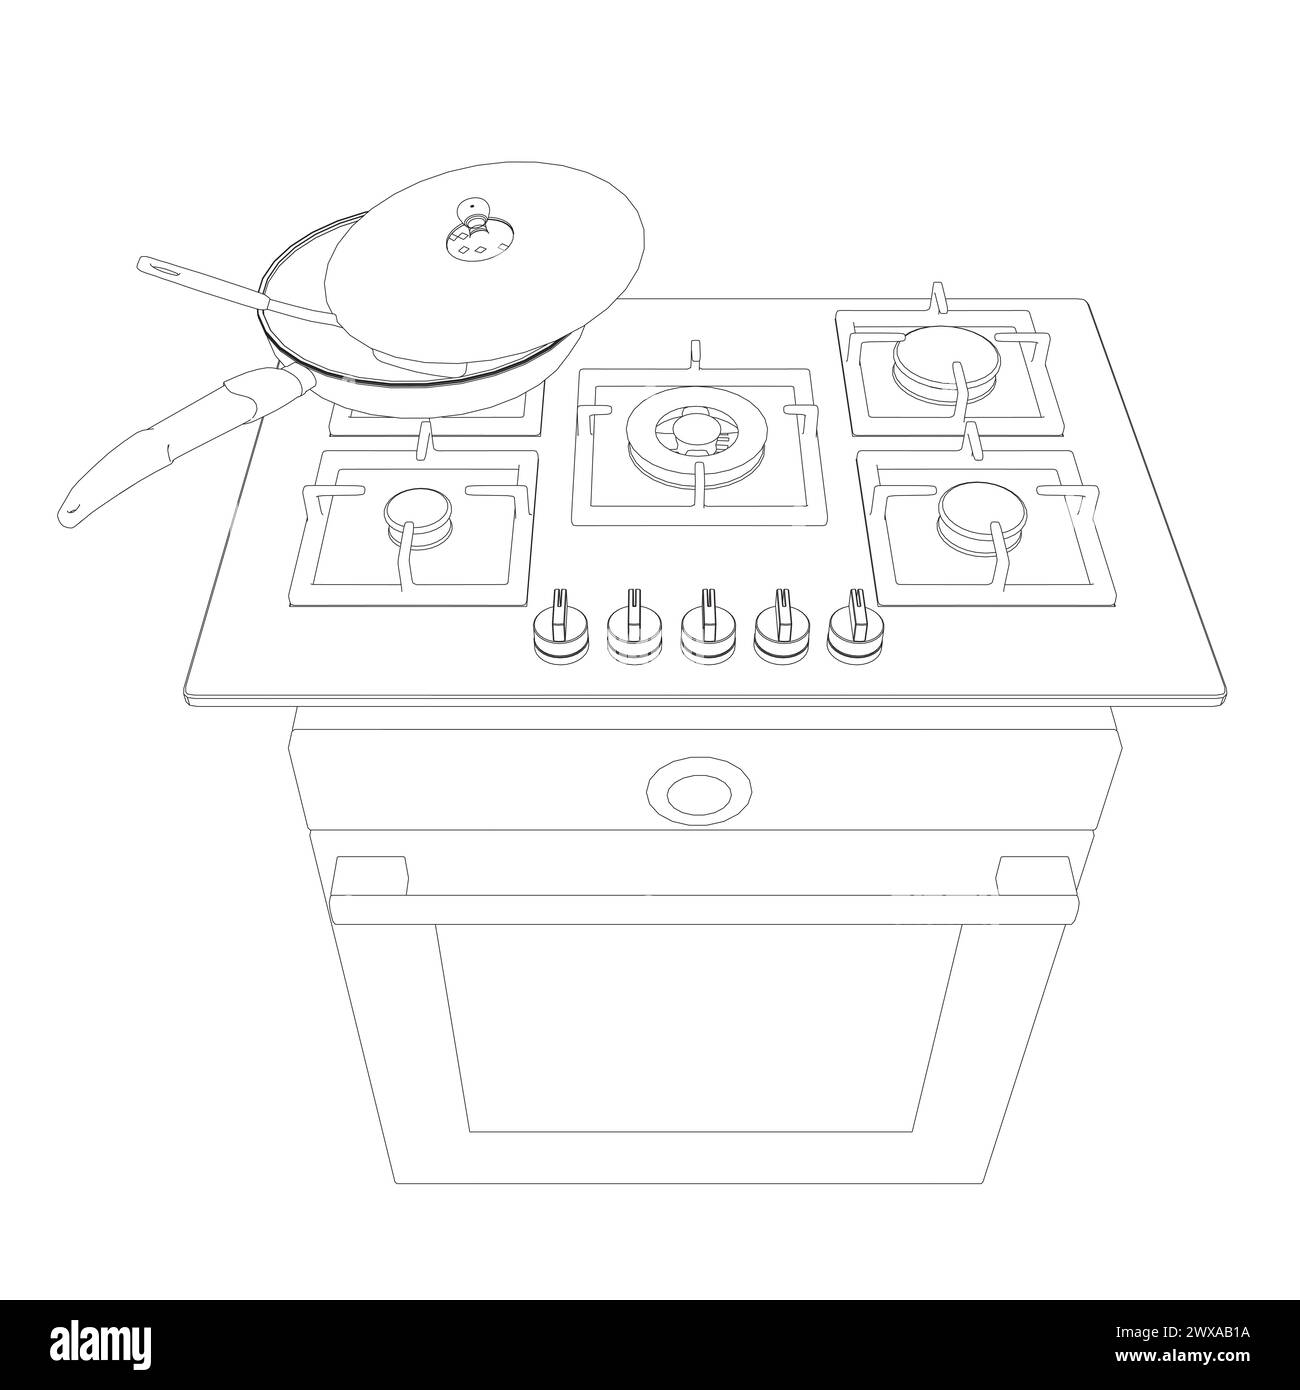 Contour of gas stove and hood. Outline oven vector illustration on white background. Vector illustration Stainless oven for cooking. Front view. Stock Vector